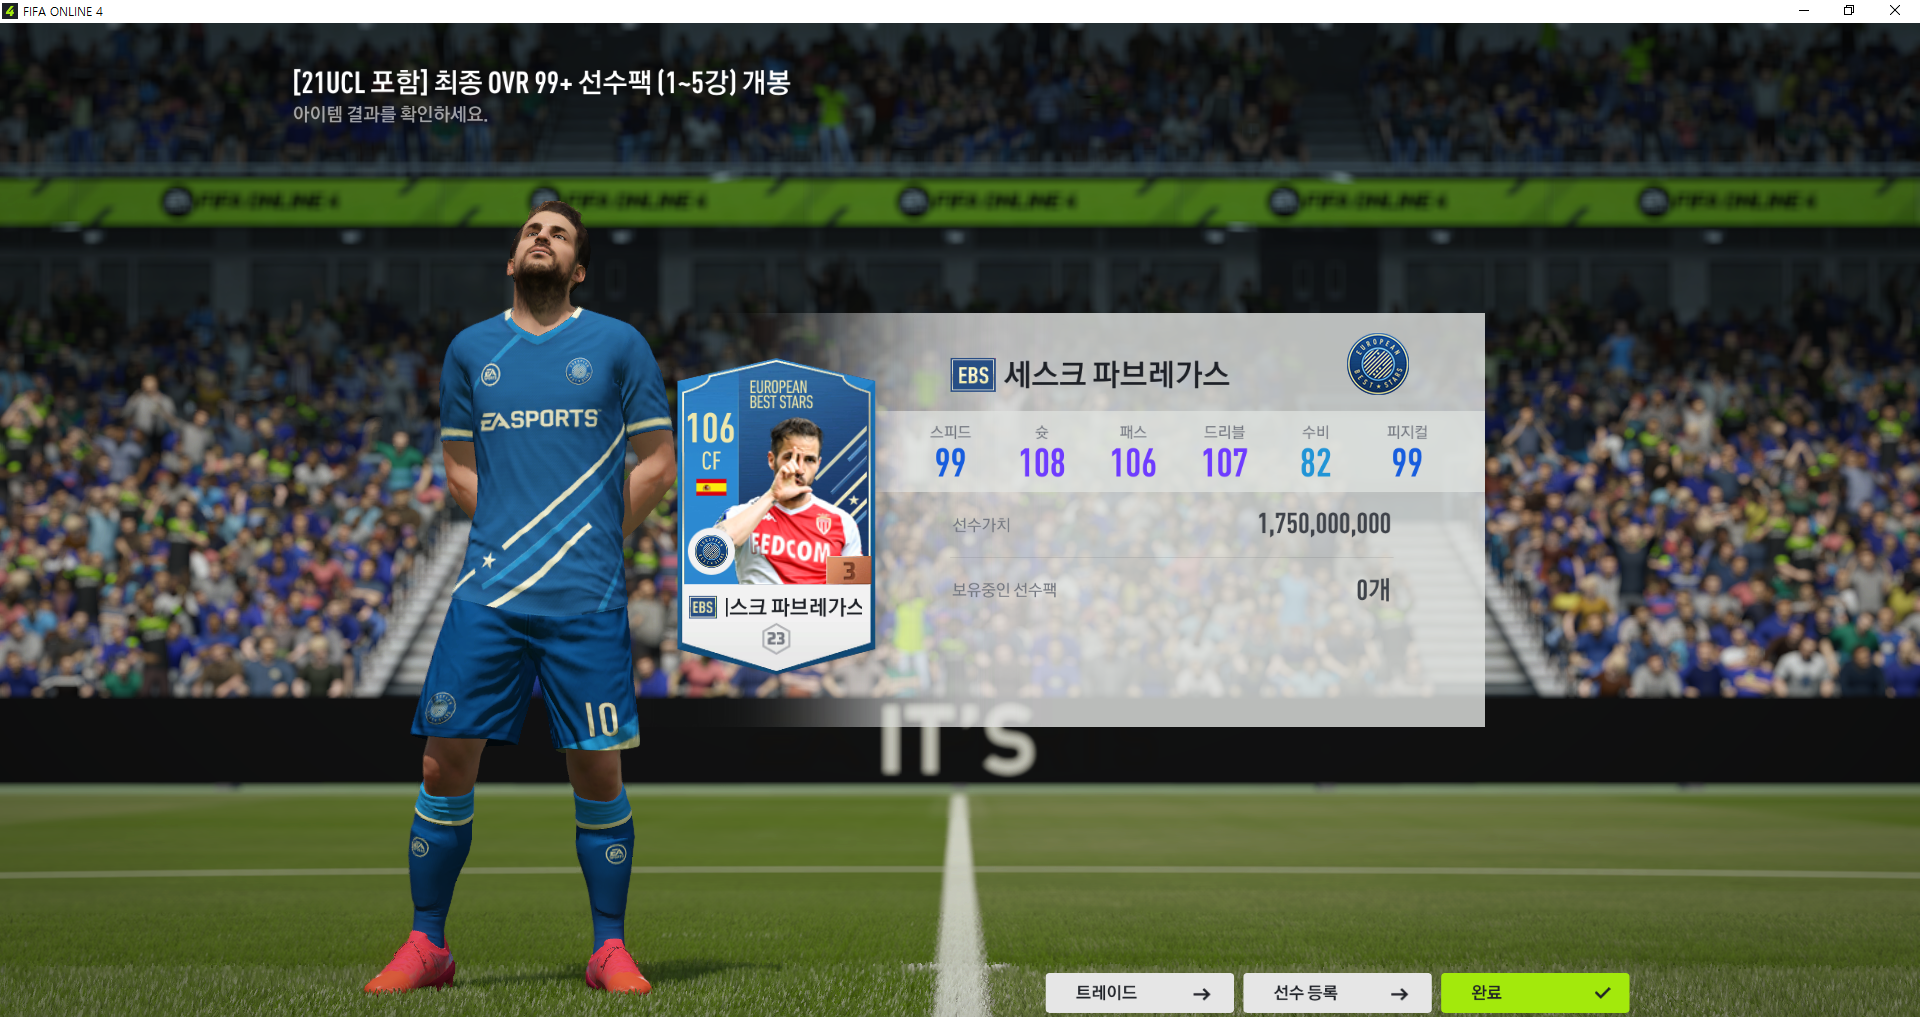 FIFA ONLINE 4 2022-03-12 오전 12_25_42.png